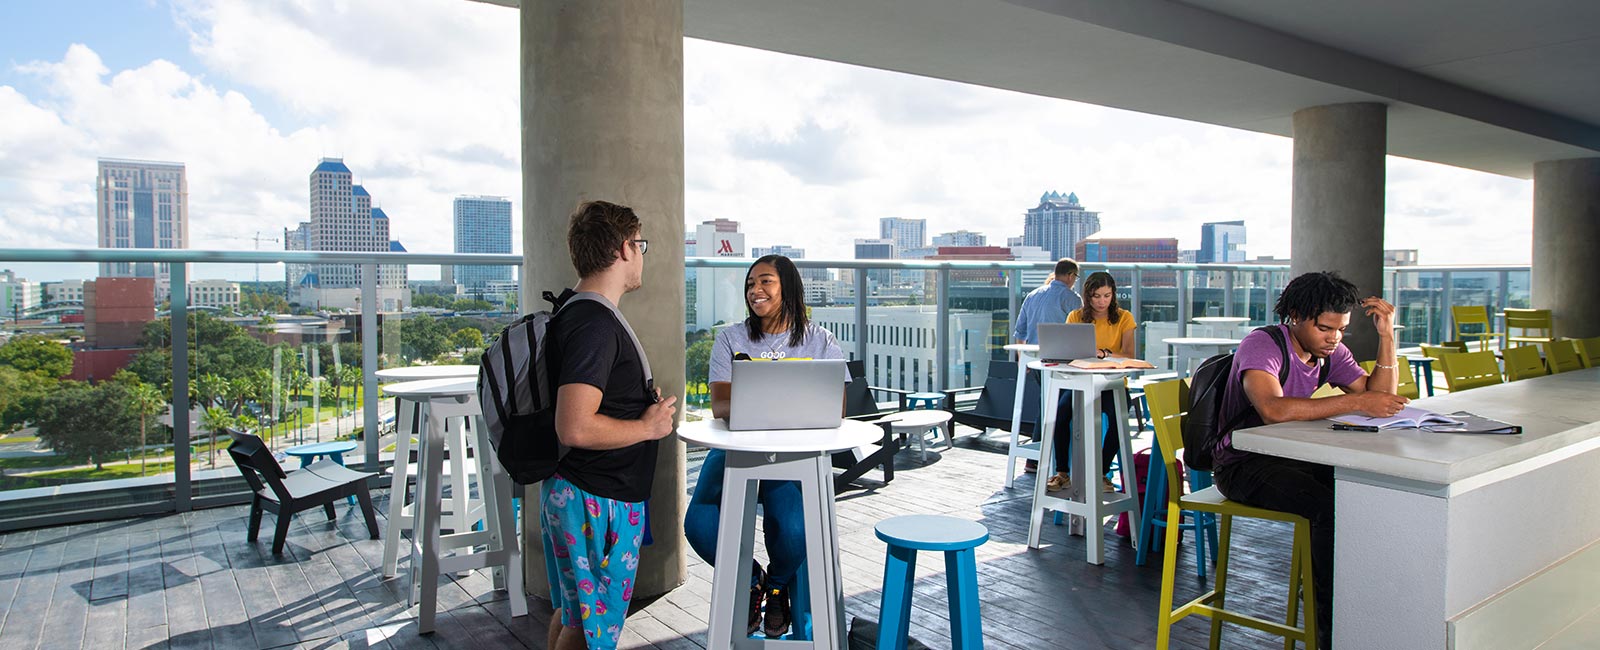 With a number of fun and inviting spaces around the campus, students can enjoy living and learning; from hitting the books to soaking in the views.